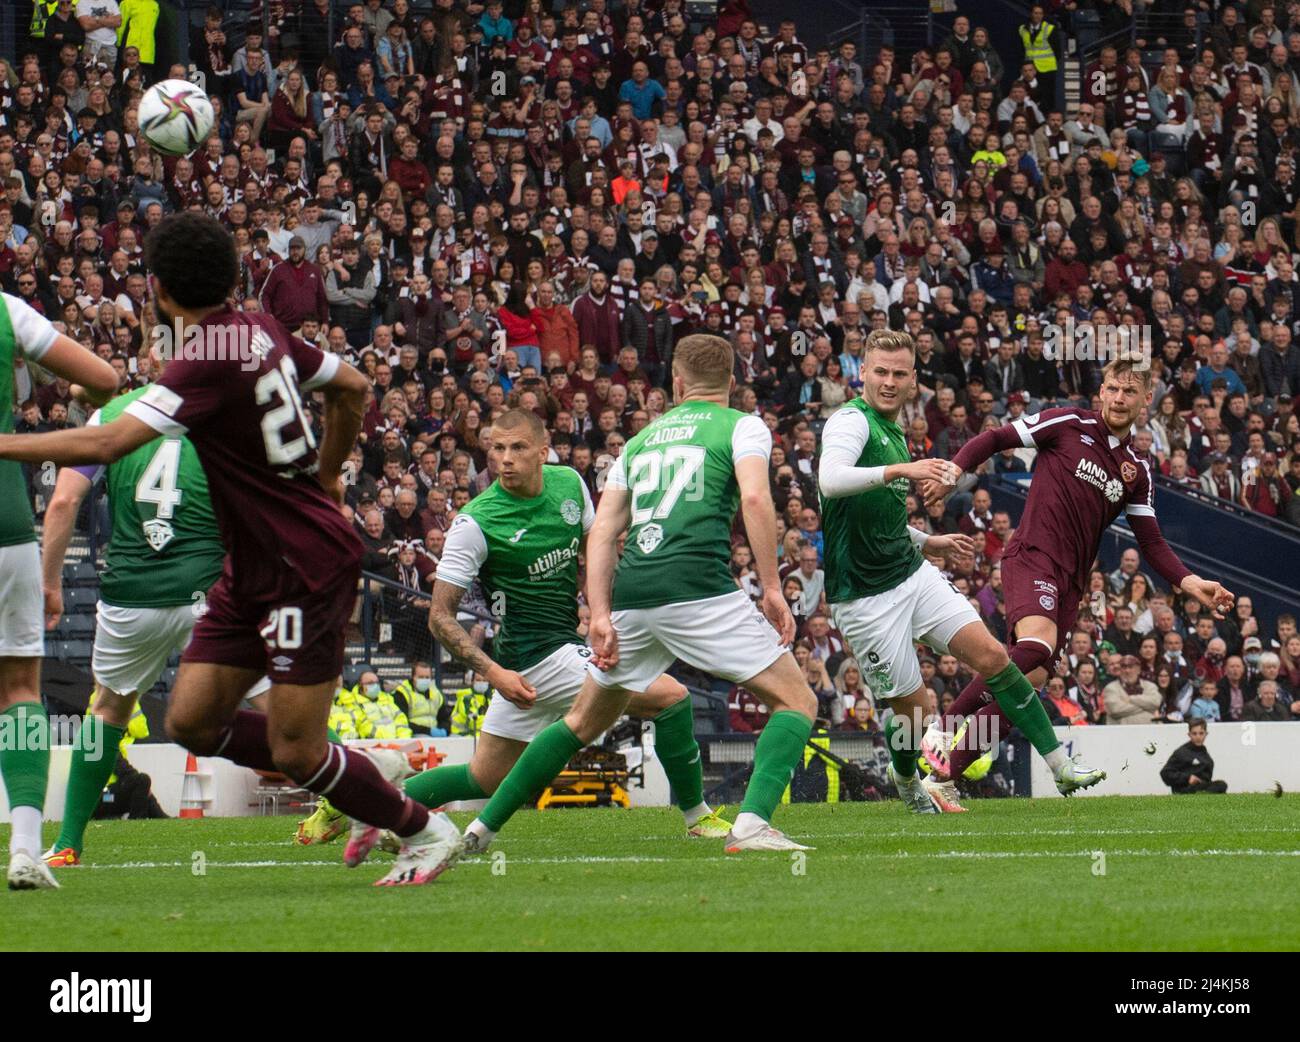 Edinburgh, UK. 16th Apr, 2022. Scottish Cup Semi-Final - Heart of Midlothian FC v Hibernian FC 16/04/2022 Pic shows: Hearts' left-back, Stephen Kingsley, fires home what proved to be the winning goal as Hearts take on Hibs in the Scottish Cup semi final at Hampden Park, Glasgow Credit: Ian Jacobs/Alamy Live News Stock Photo